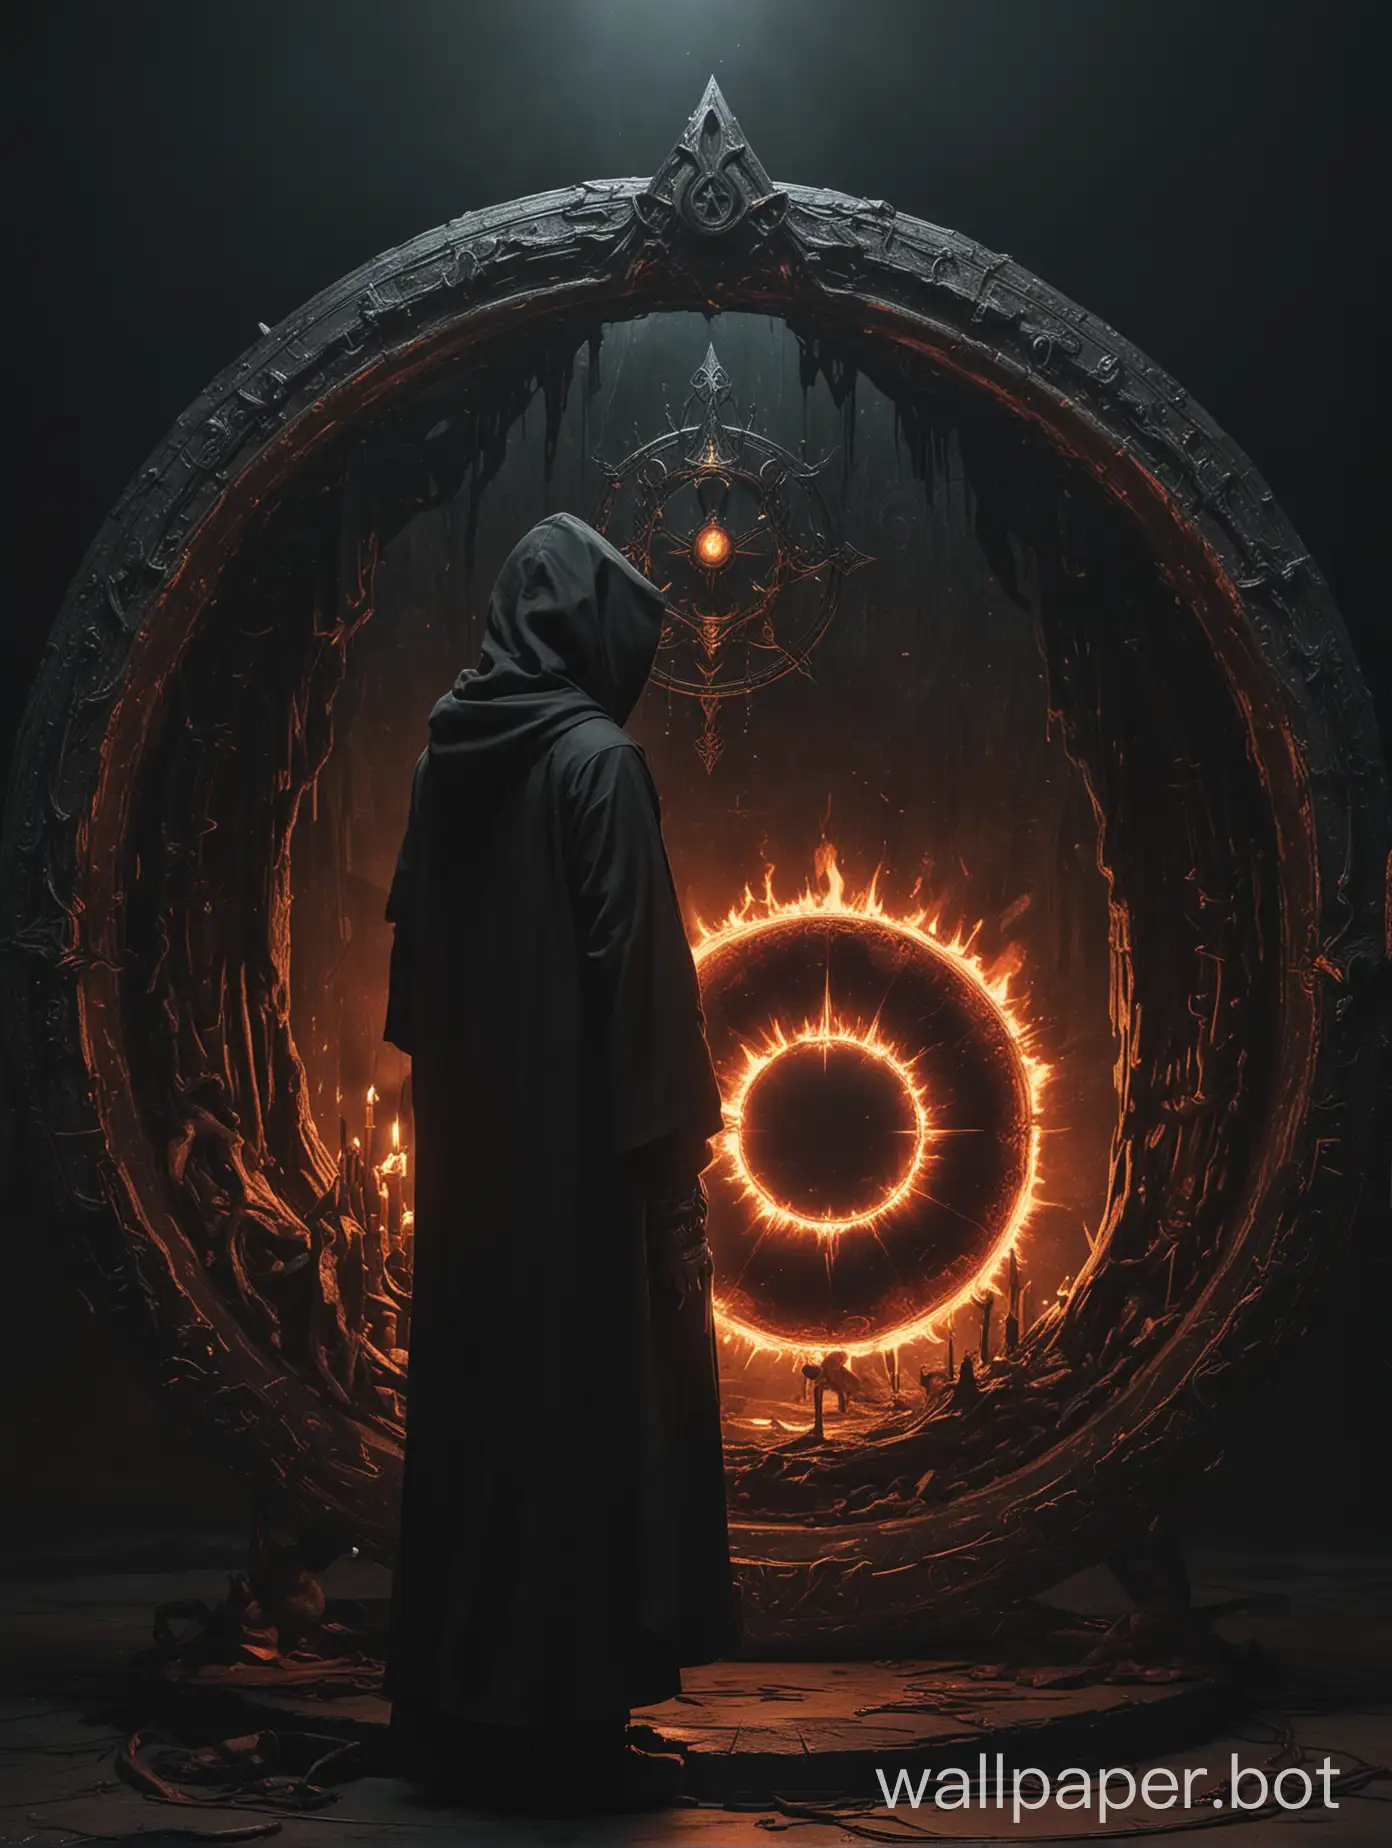 aefrayed image of a man in a hooded cloak standing in front of a circular object, occultist, merely art for dark metal music, cultist, holy flame spell, abstract occult epic composition, diablo digital concept art, album art, god of death, detailed cover artwork, king of time reaper, the allfather, dark soul concept